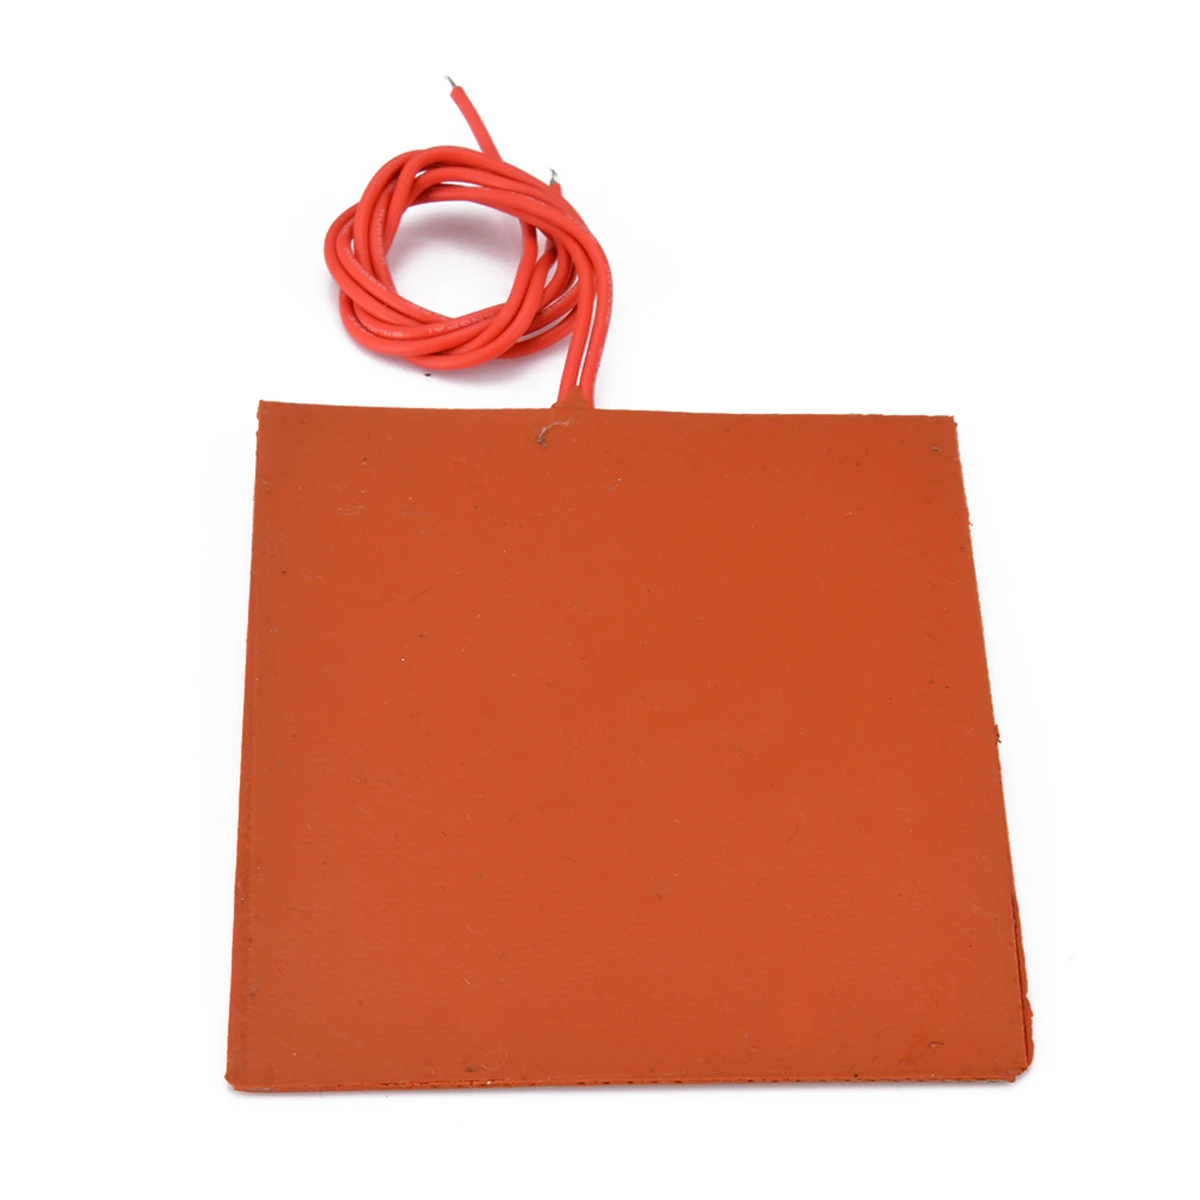 100X80Mm 12V 20W Heated Bed Heater Pad Silicone Heating Mat For 3D Printer QP